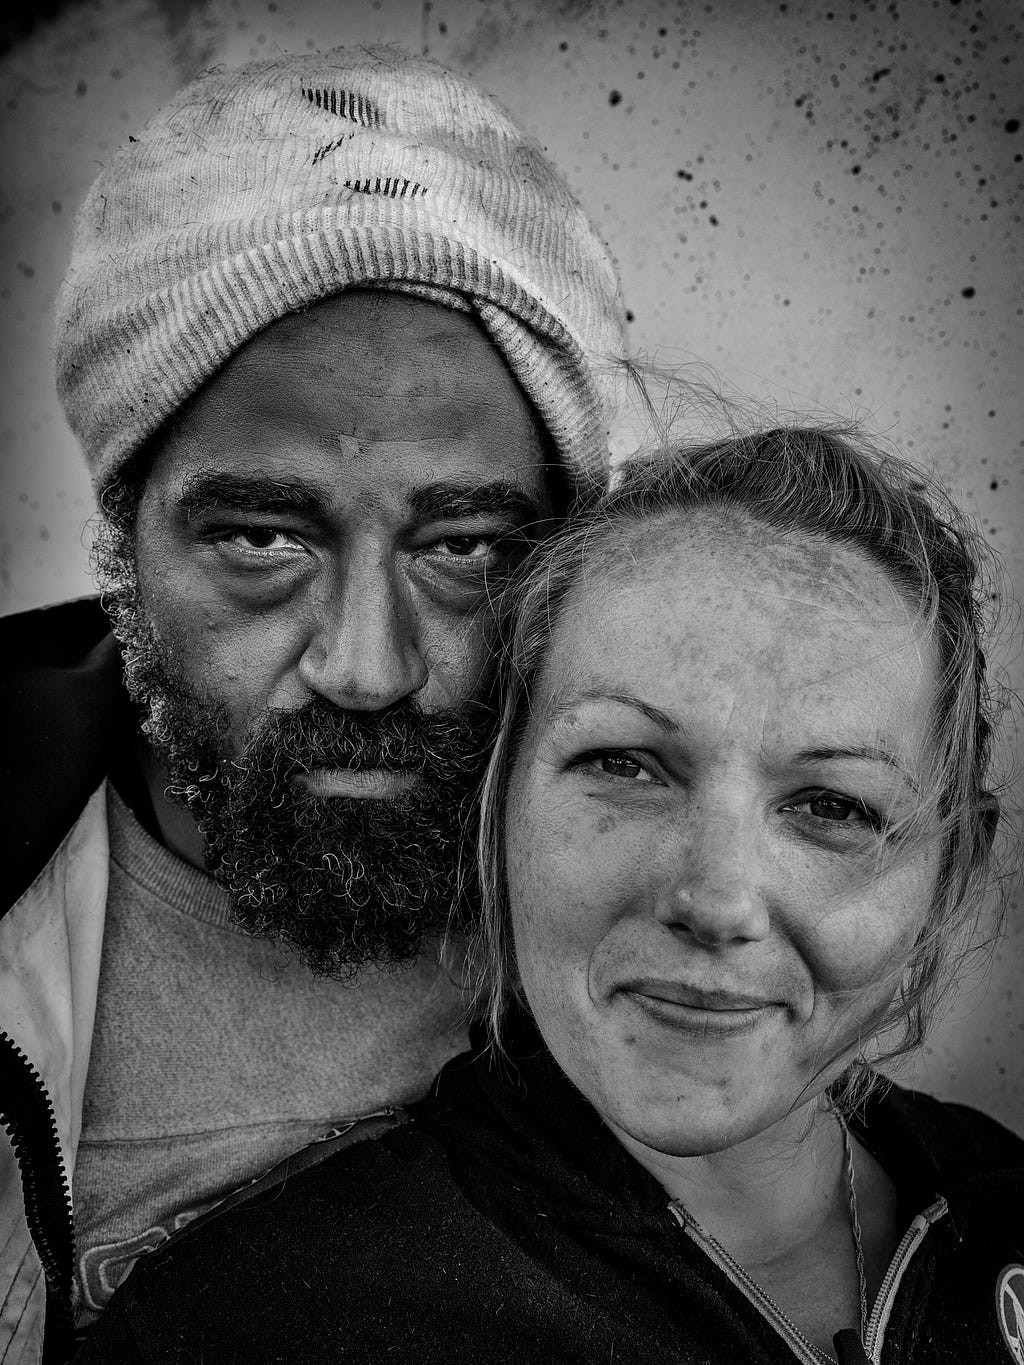 Amelia Mustain, 34 and Patrick Riley, 42. They have been together for about 5 years living in an RV currently parked on Selby Street near Evans. Photo and interview: Robert Gumpert 16 June 2024